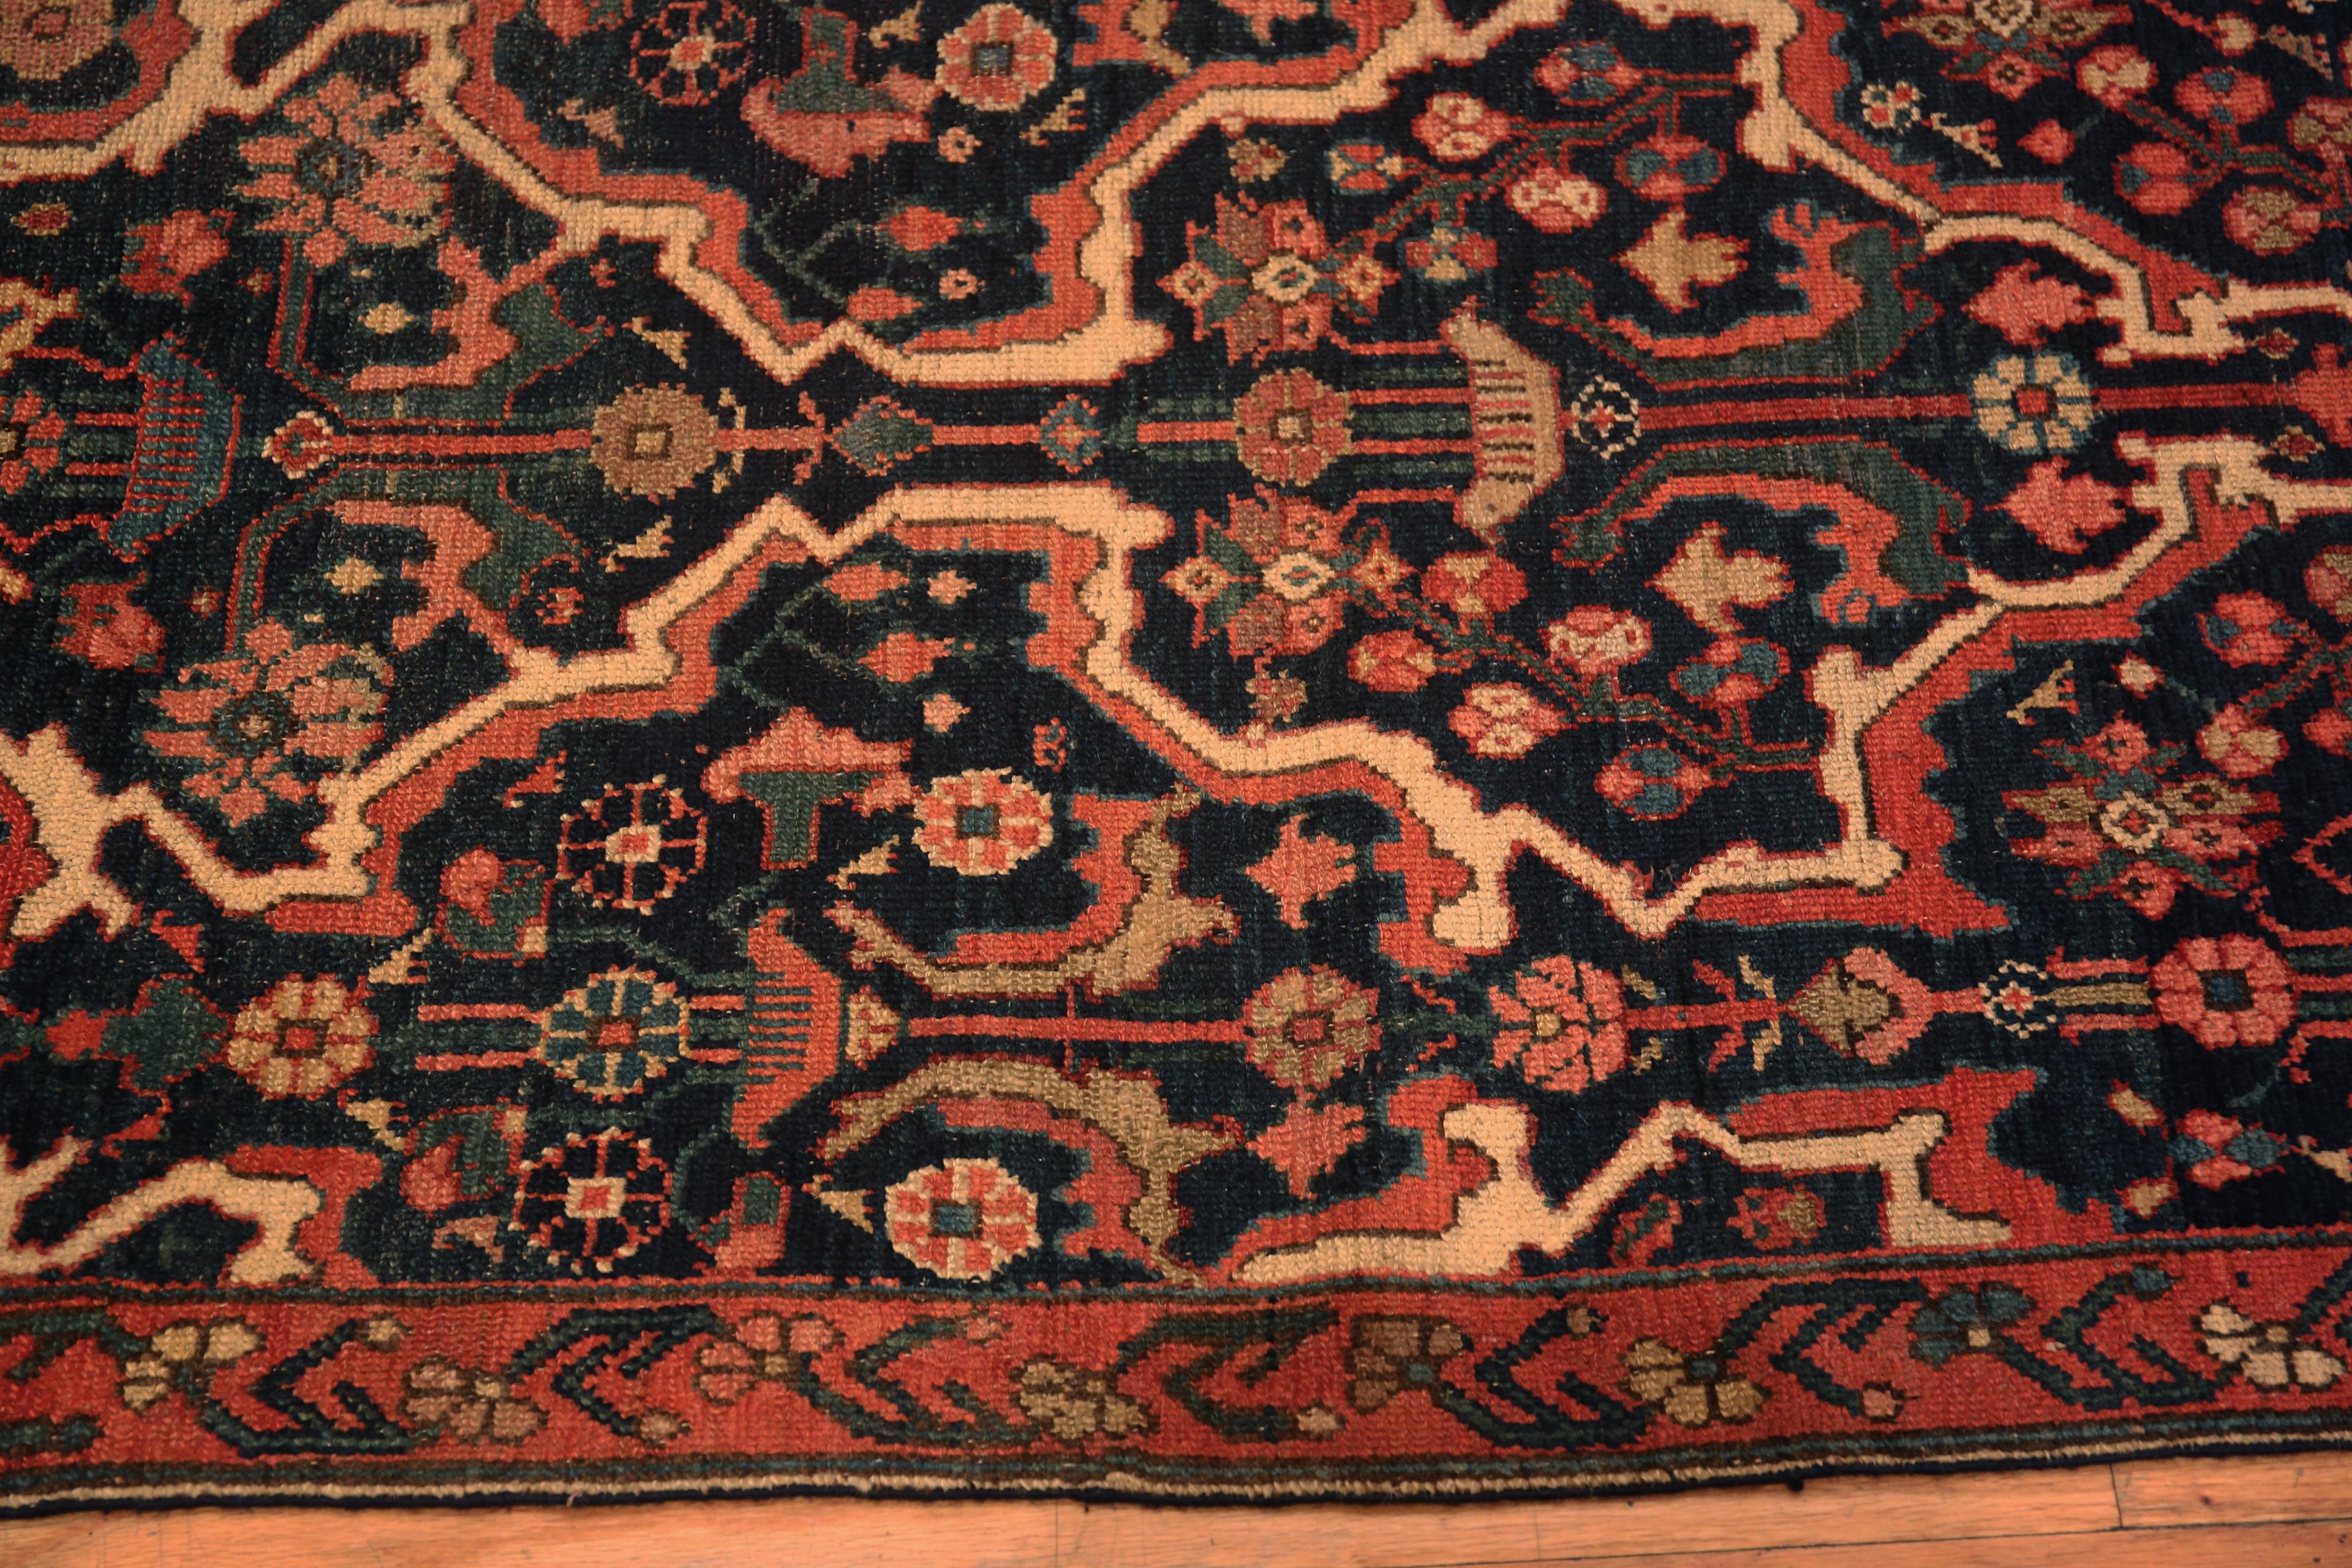 An Amazing Small Red And Blue Geometric Medallion Design Antique Persian Heriz Area Rug, Country of origin: Persian Rugs, Circa date: 1920